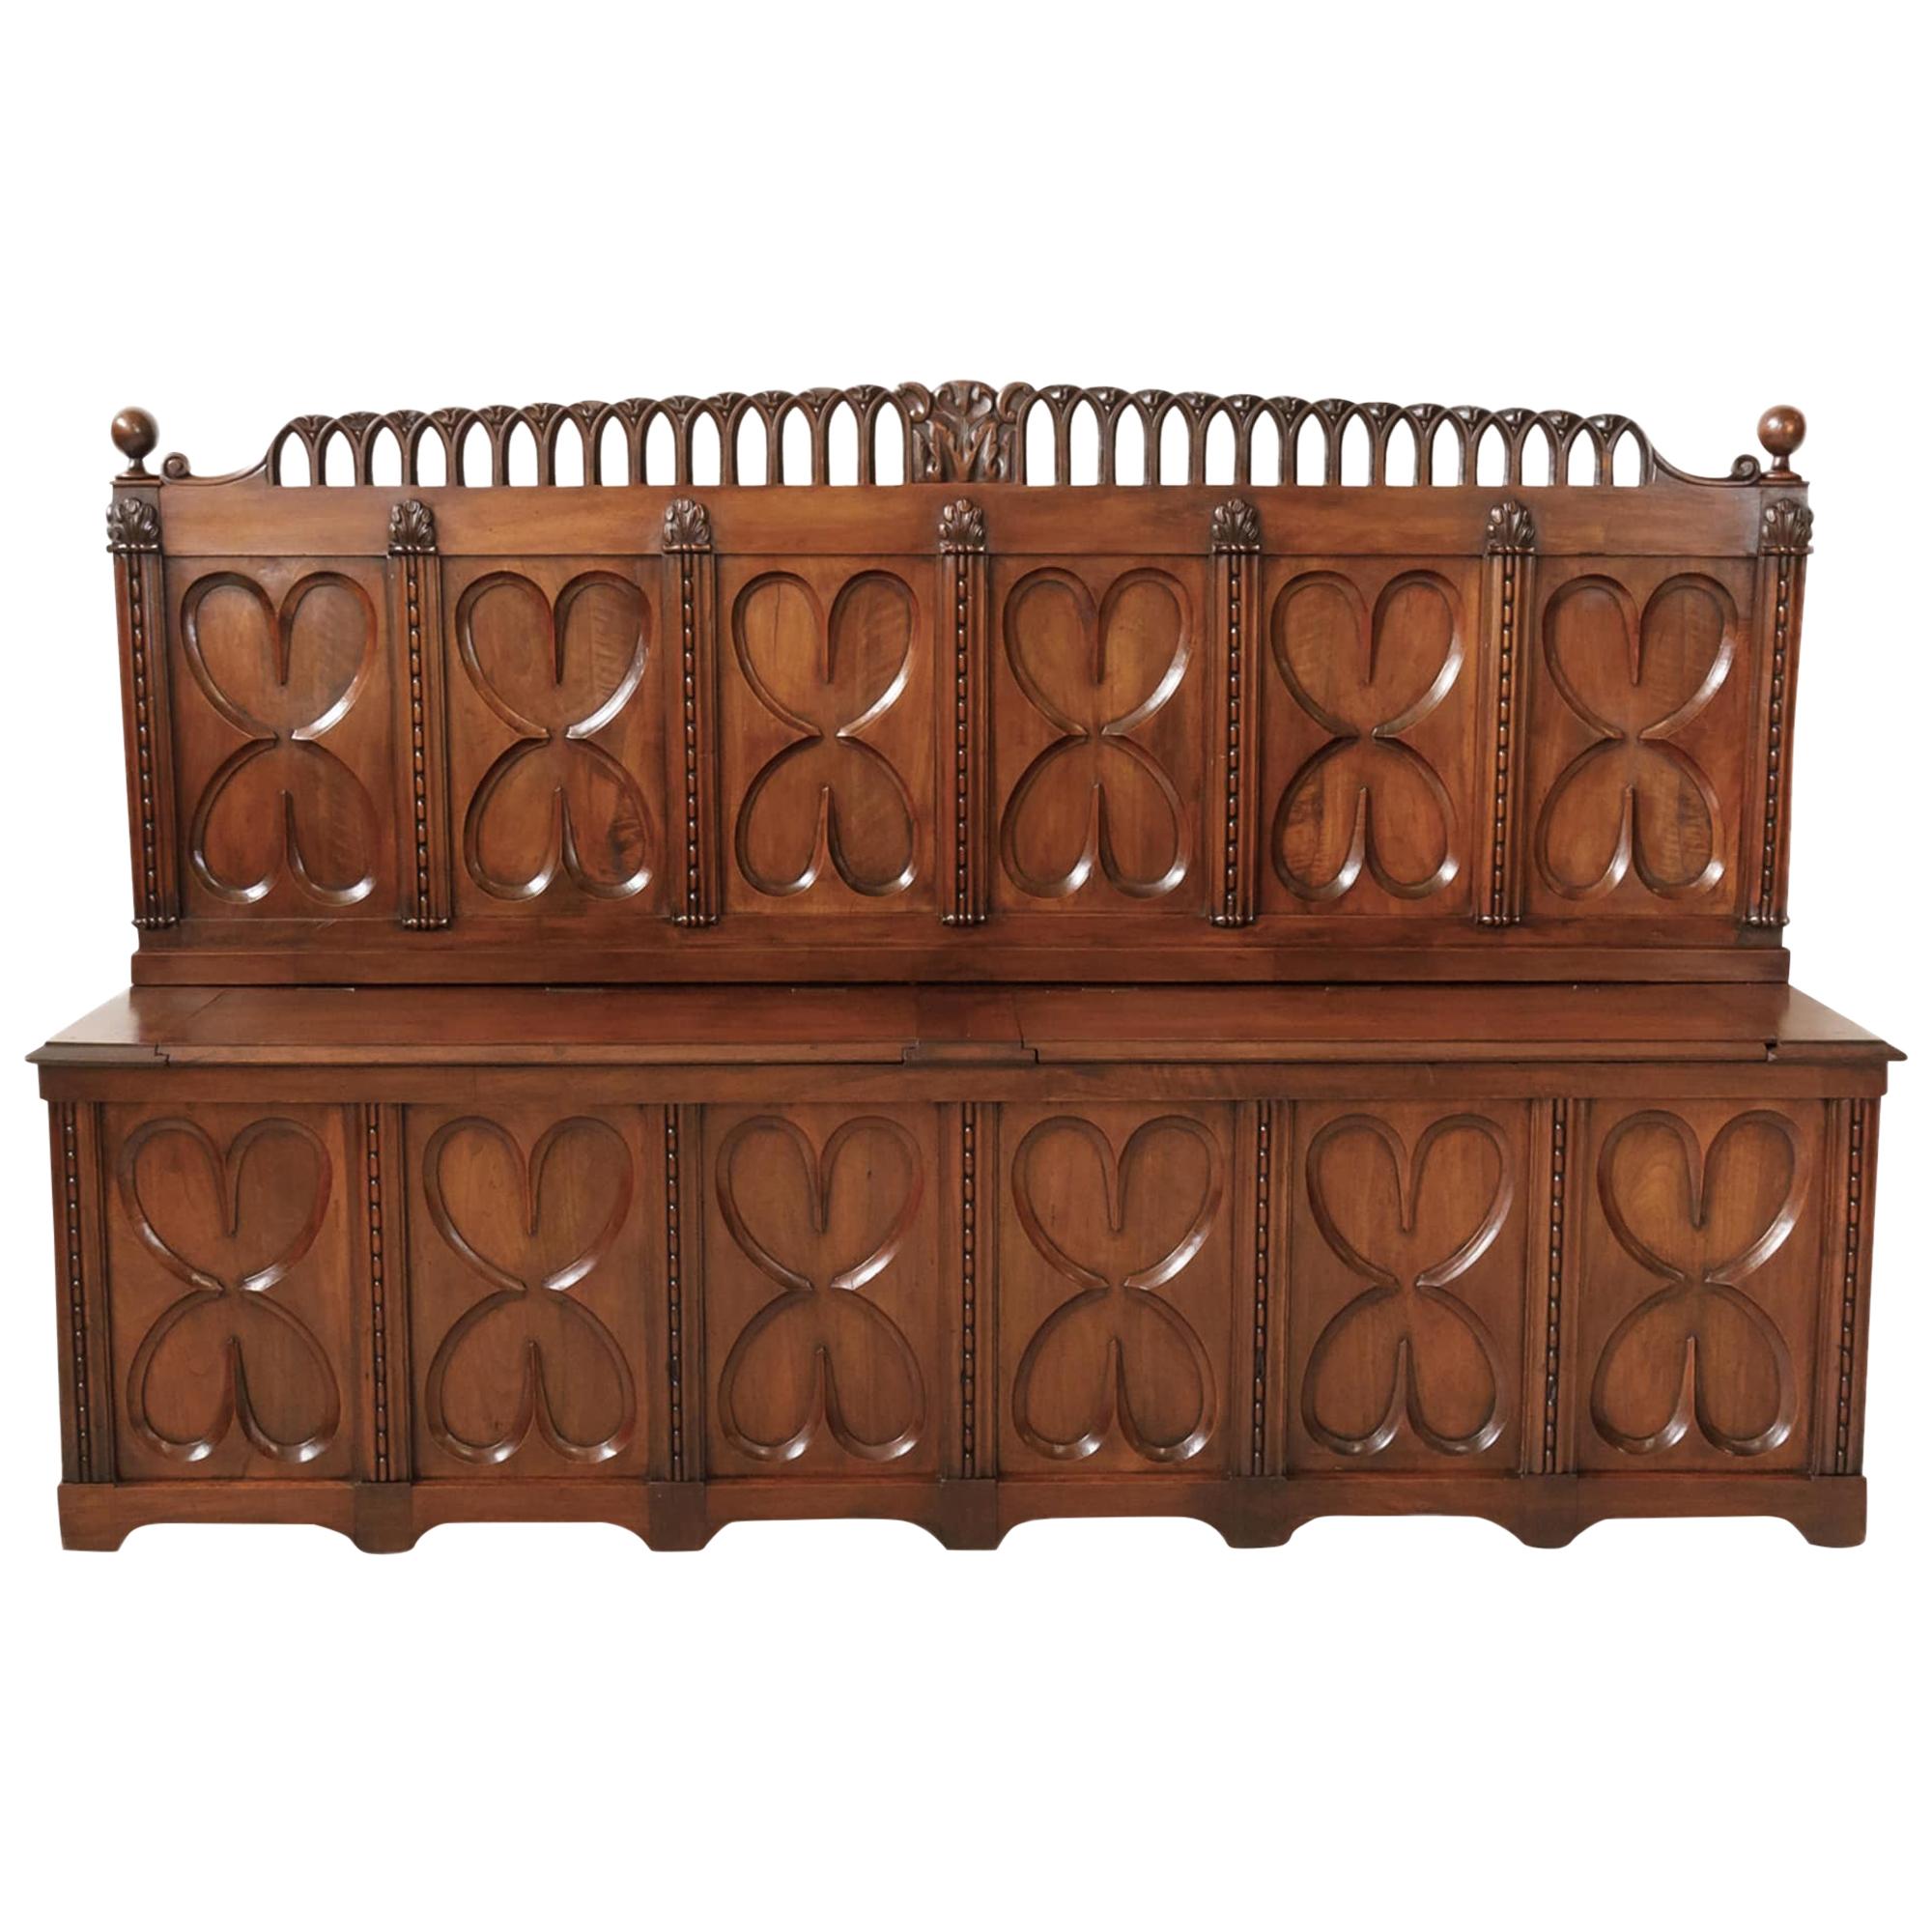 18th Century French Gothic Revival Period Walnut Settle or Hall Bench with Lift  For Sale